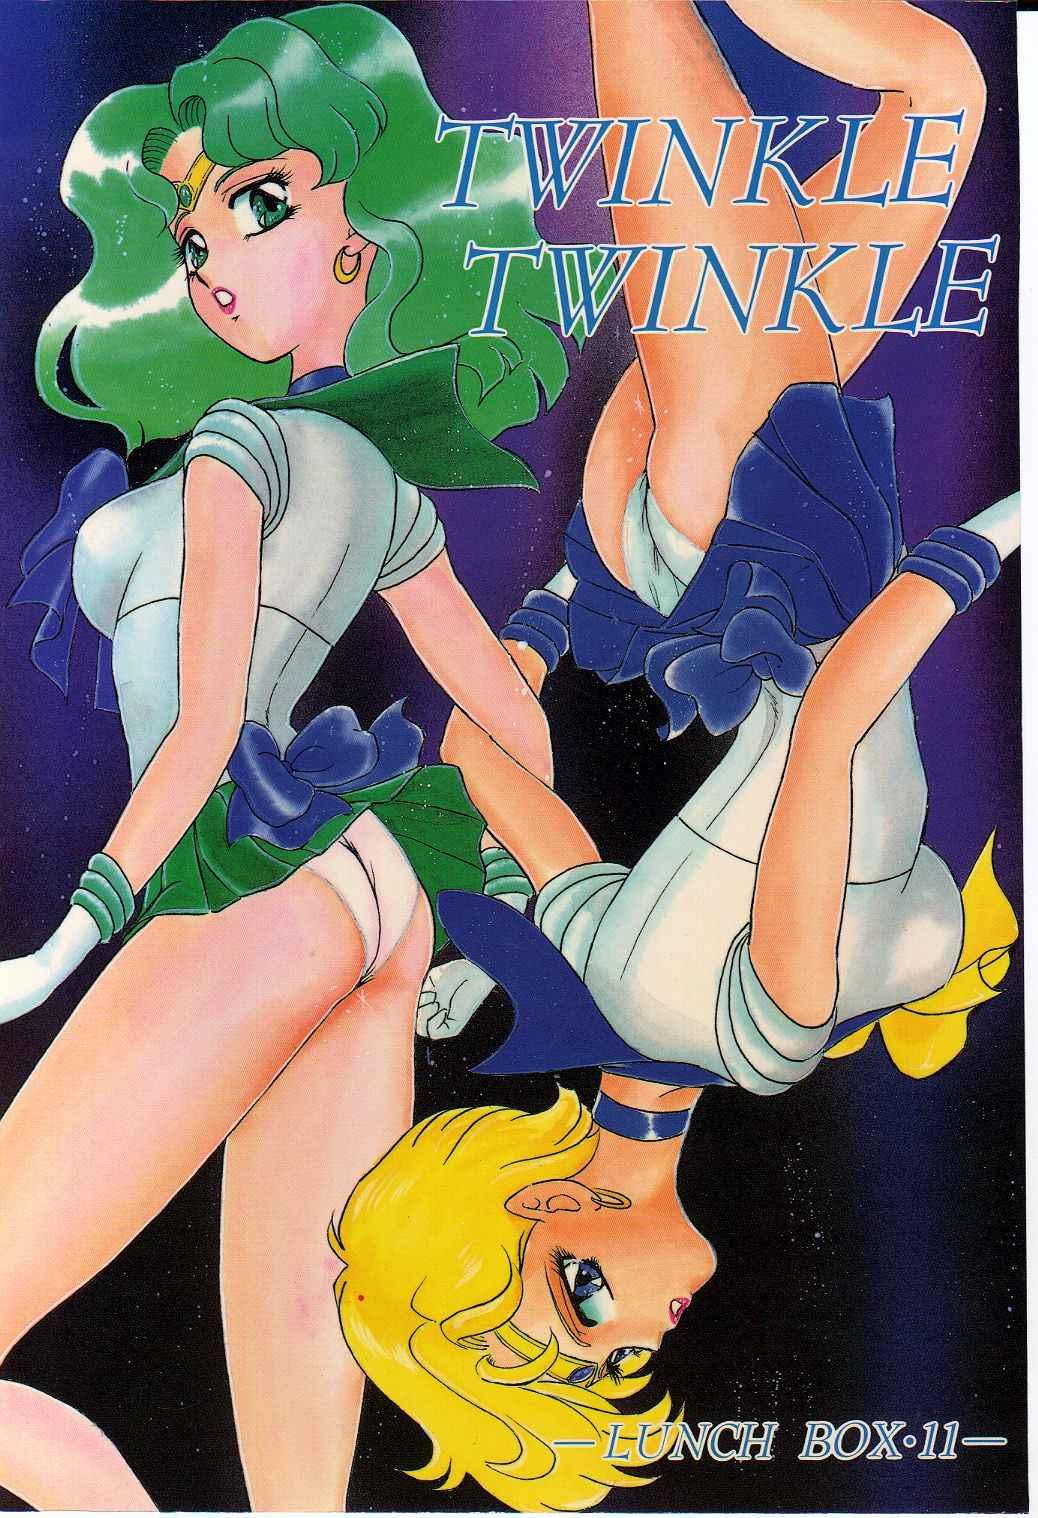 European Porn Lunch Box 11 - Twinkle Twinkle - Sailor moon Gay Medical - Picture 1